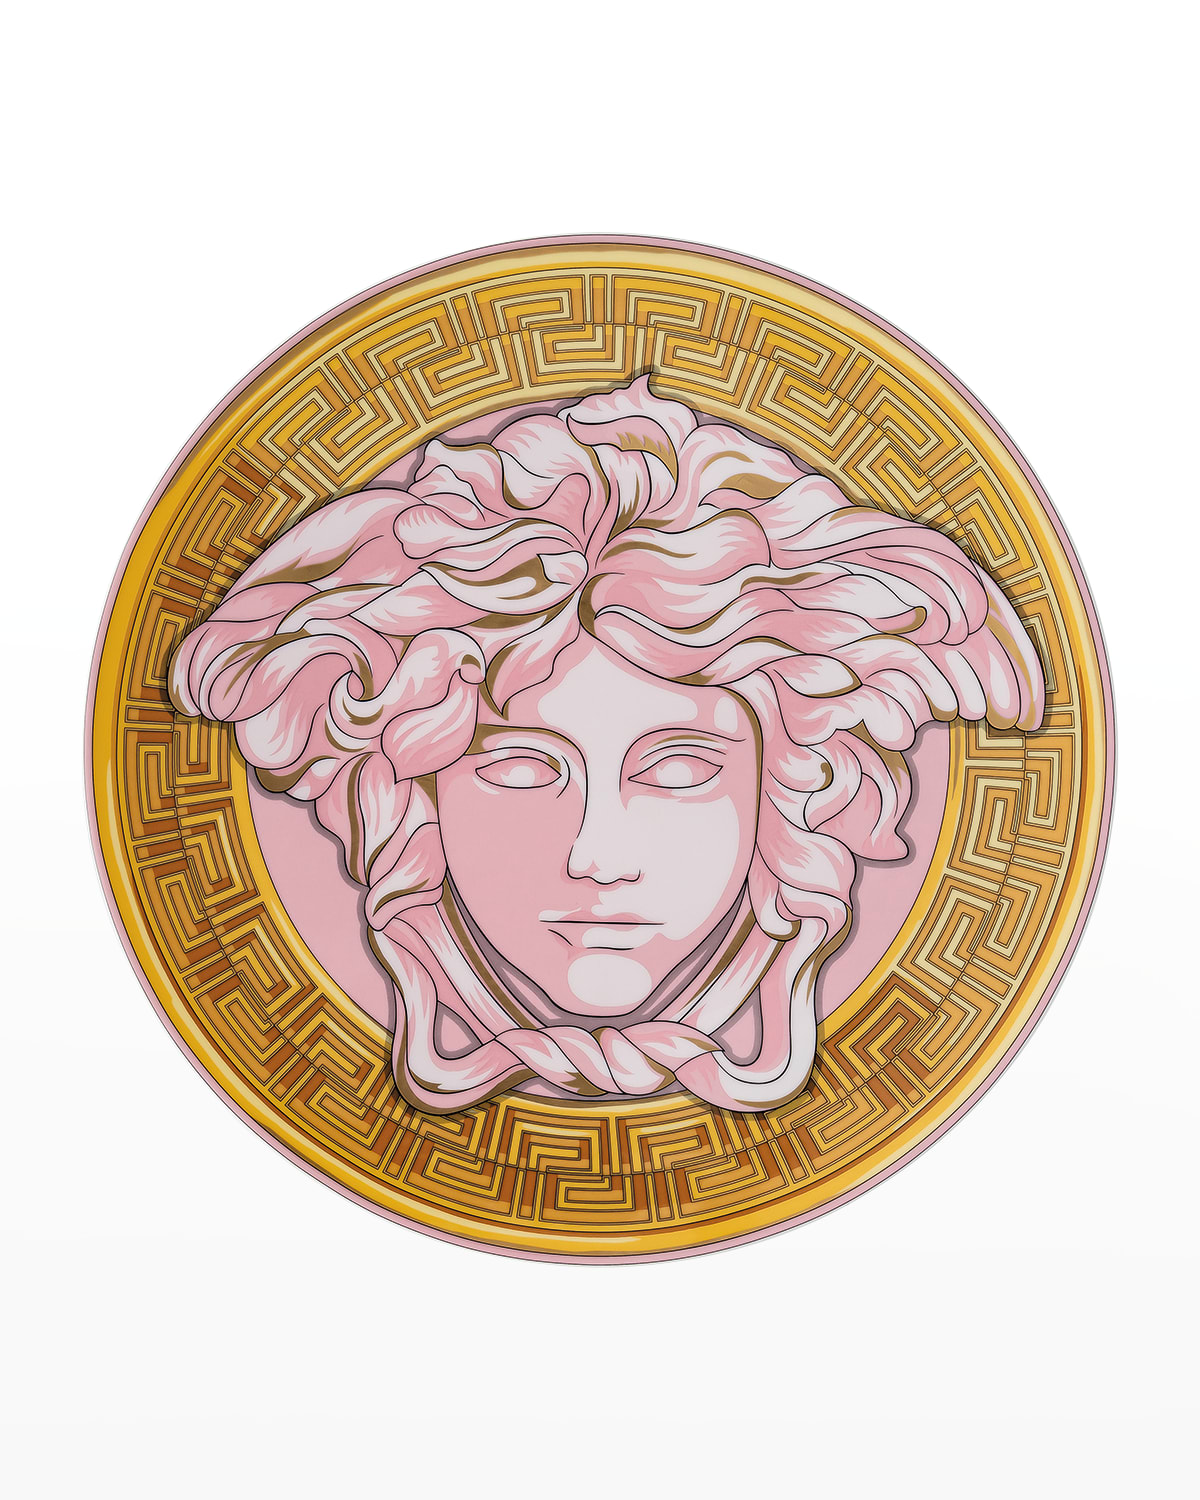 VERSACE MEDUSA AMPLIFIED PINK COIN SERVICE PLATE